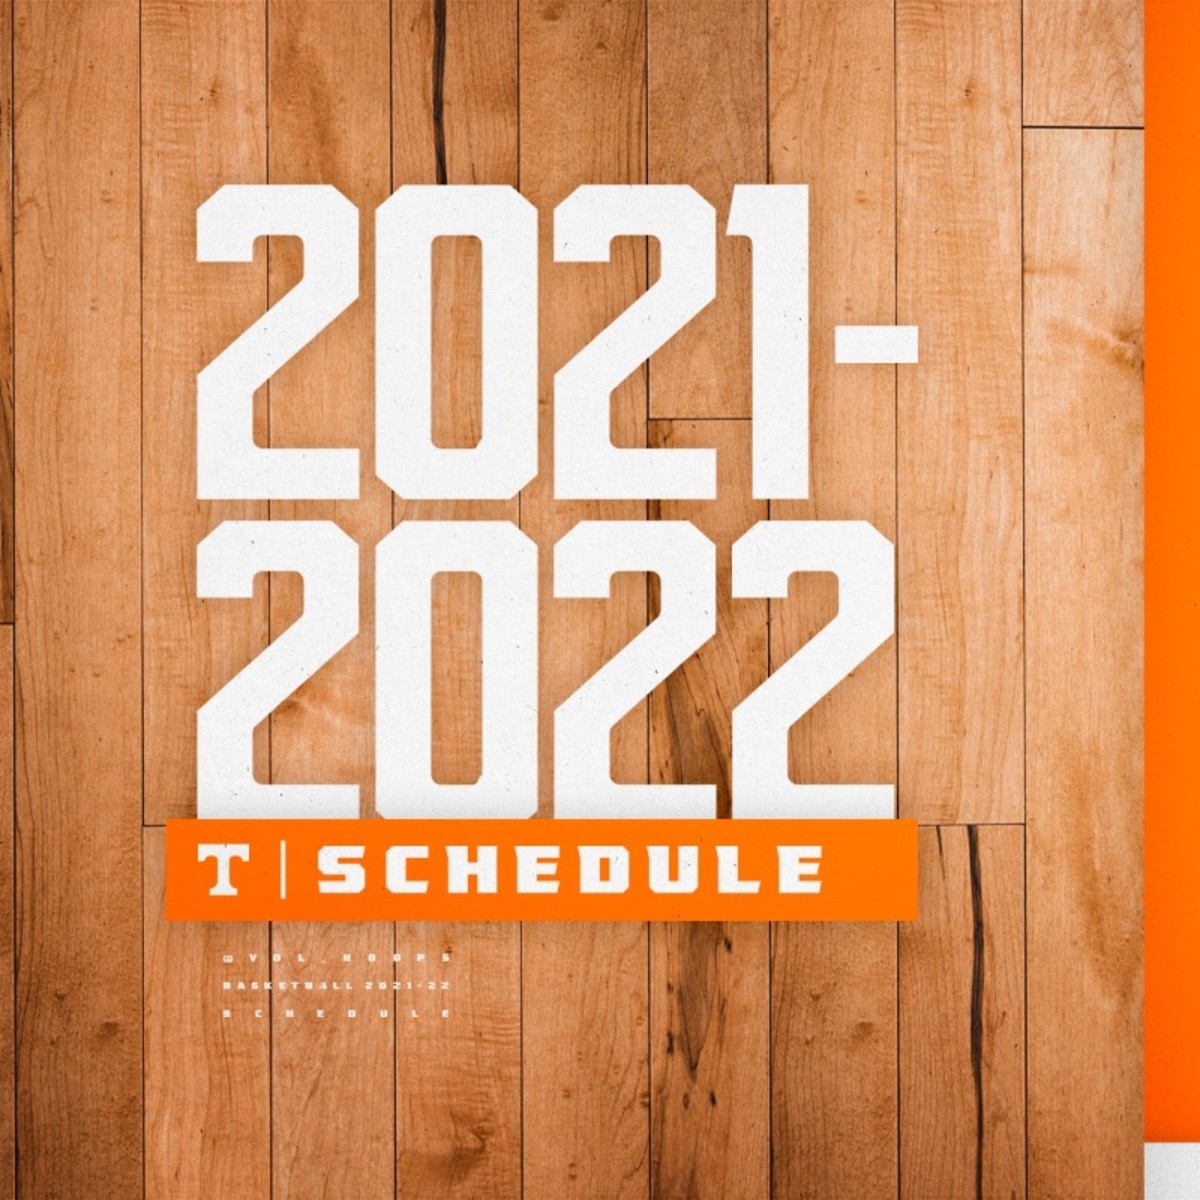 Printable Tennessee Basketball Schedule Free Printable Templates